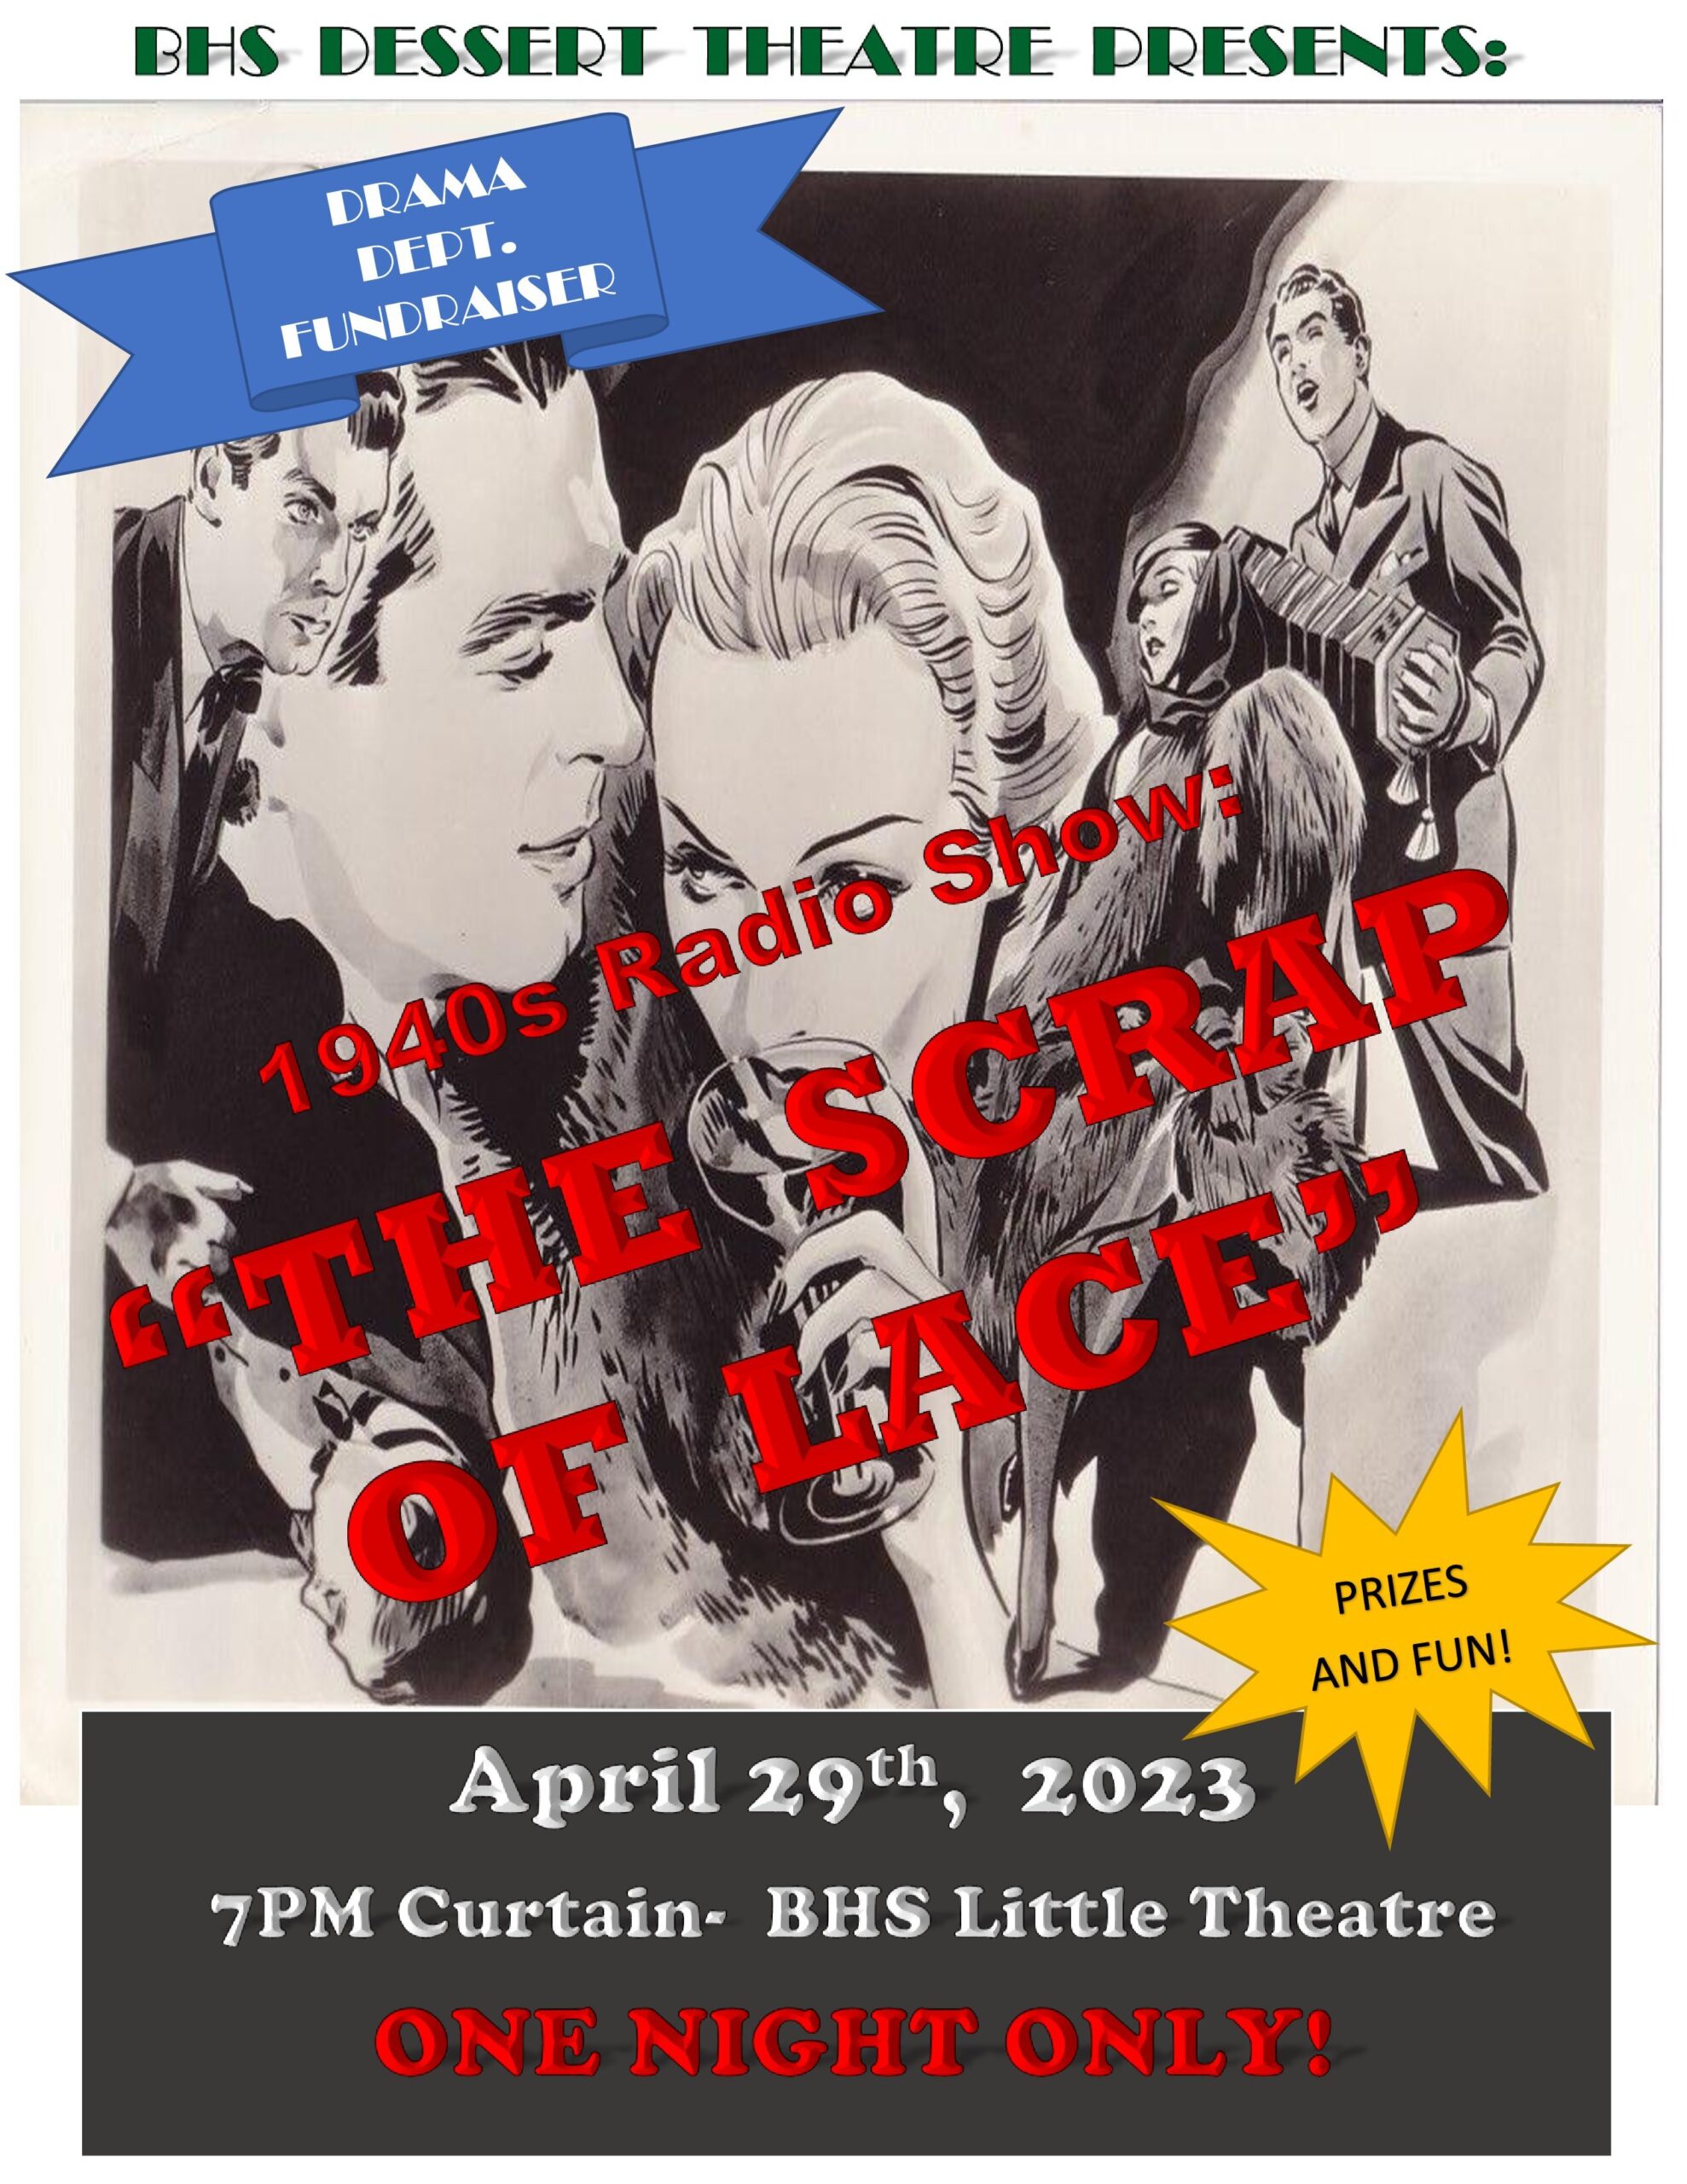 BHS Drama Dept Senior Show and Fundraiser, Prizes, Desserts and Fun